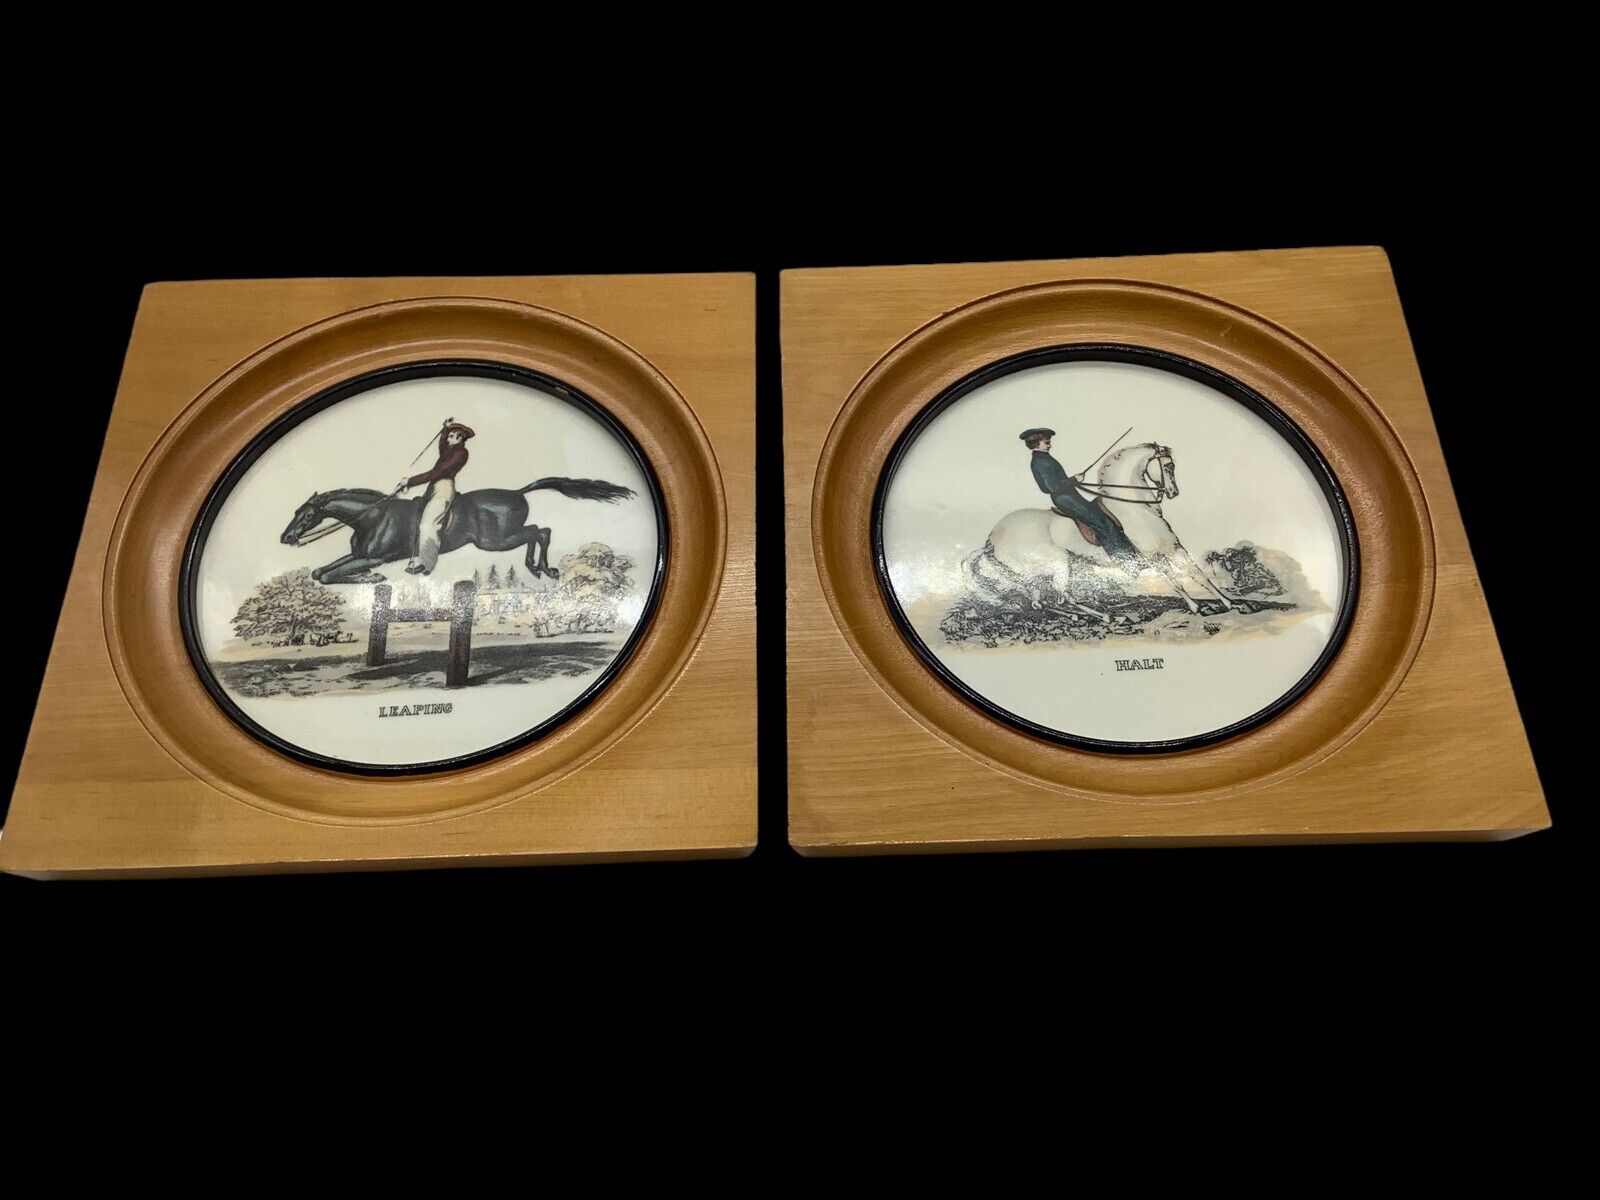 Vintage Equestrian Hyalyn Plates, Leaping and Halt